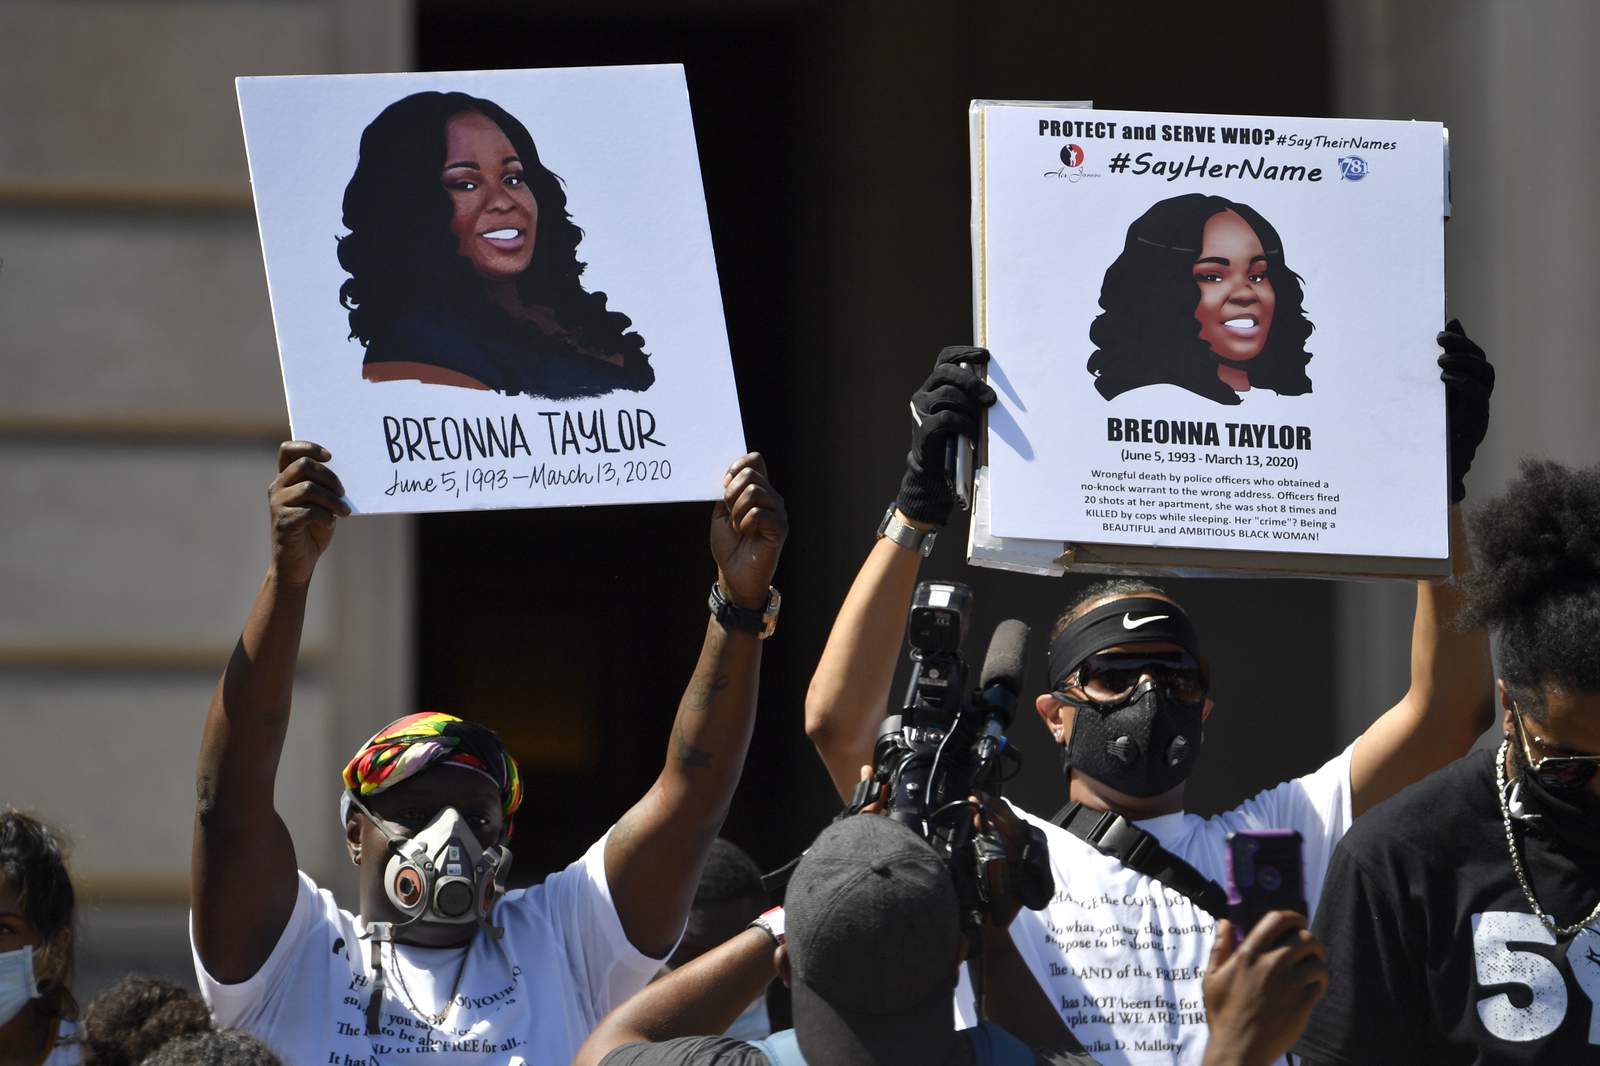 UPDATE: City to pay $12 million to Breonna Taylor’s mom, reform police